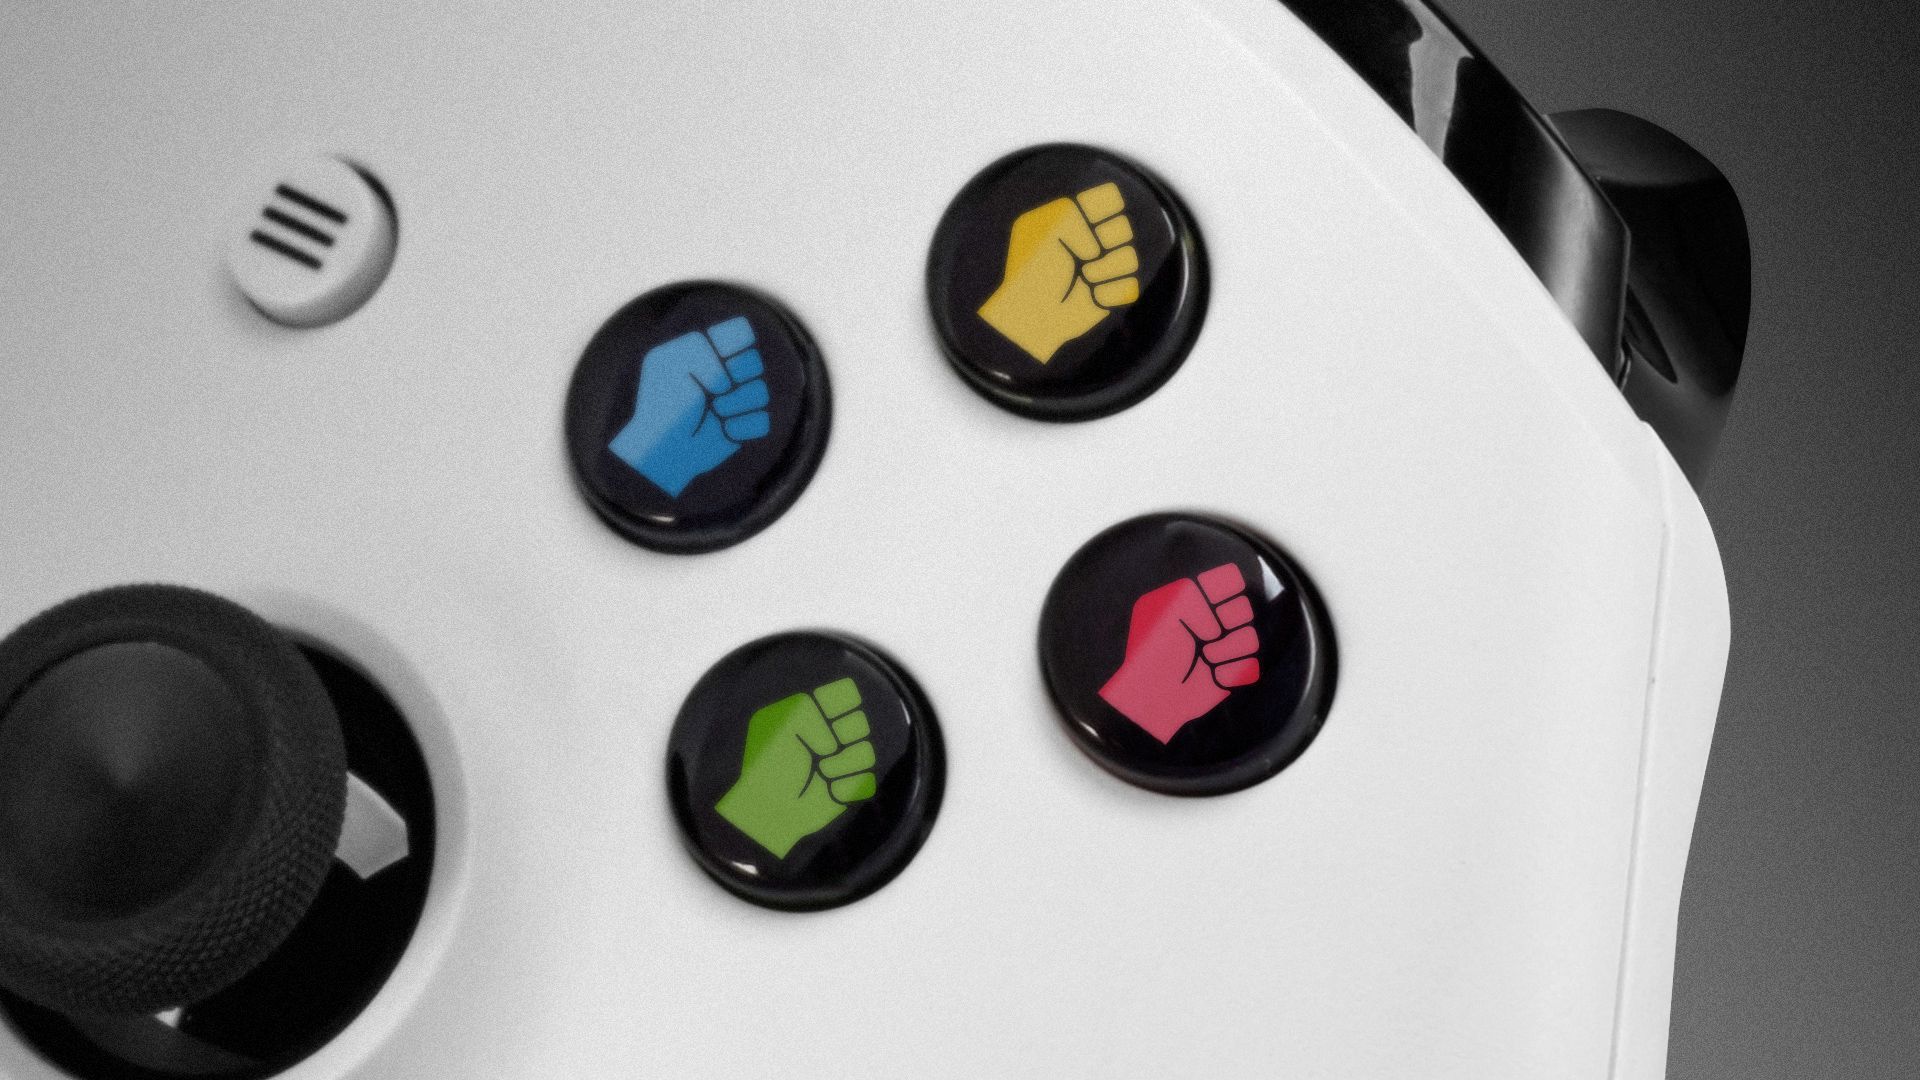 Illustration of a gaming controller with different fist icons on the buttons. 